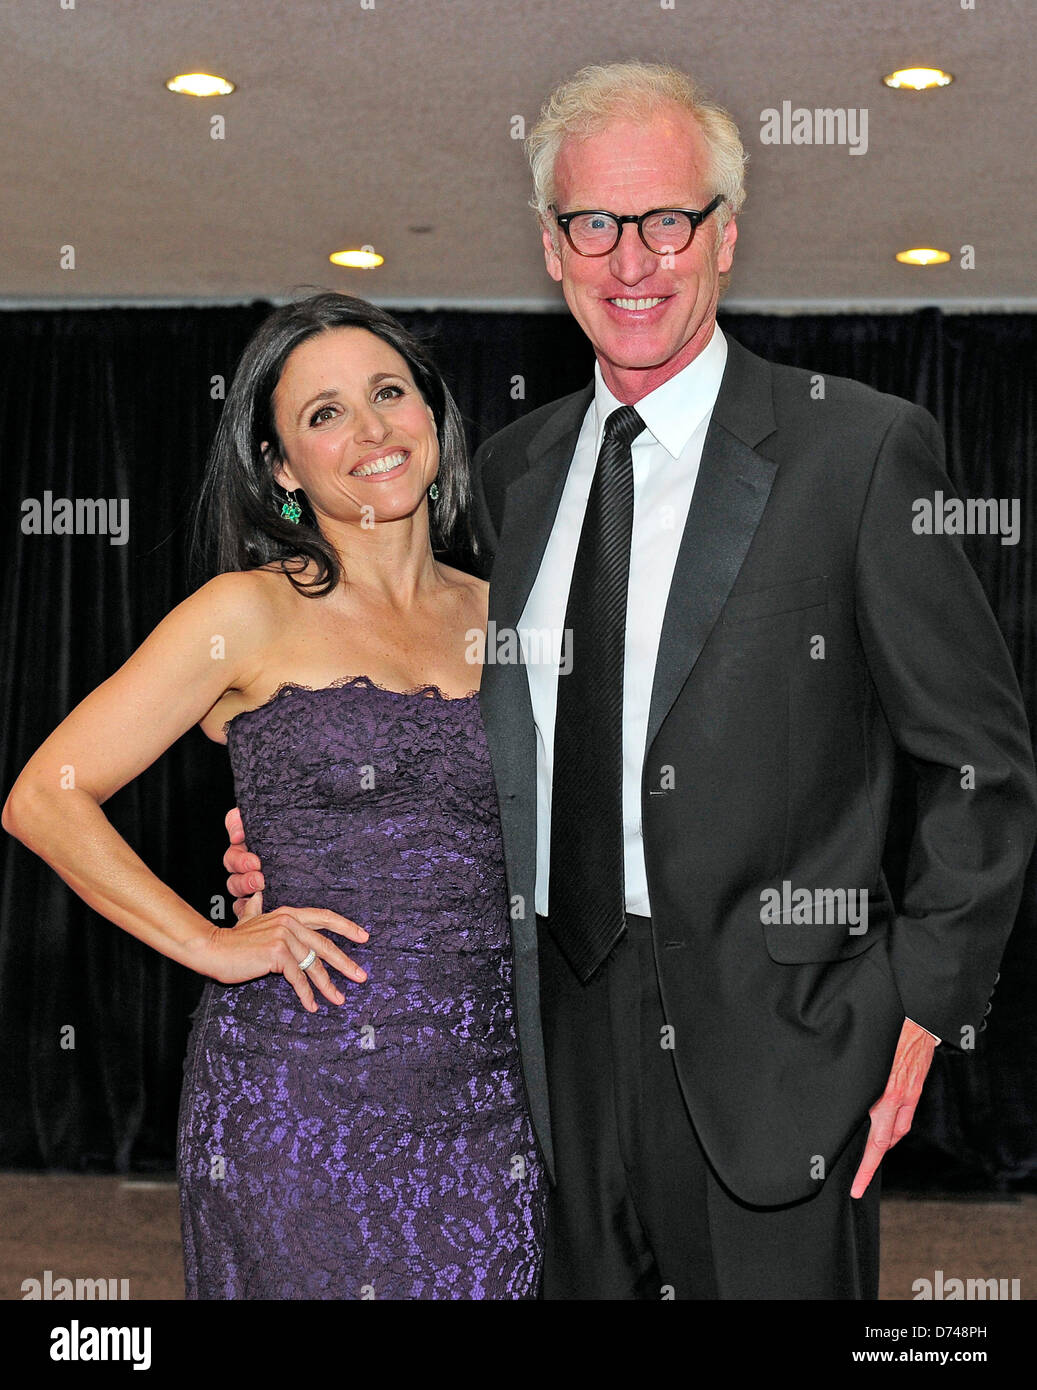 Julia Louis-Dreyfus and her husband, Brad Hall, arrive for the 2013 White House Correspondents Association Annual Dinner at the Washington Hilton Hotel on Saturday, April 27, 2013..Credit: Ron Sachs / CNP.(RESTRICTION: NO New York or New Jersey Newspapers or newspapers within a 75 mile radius of New York City) Stock Photo